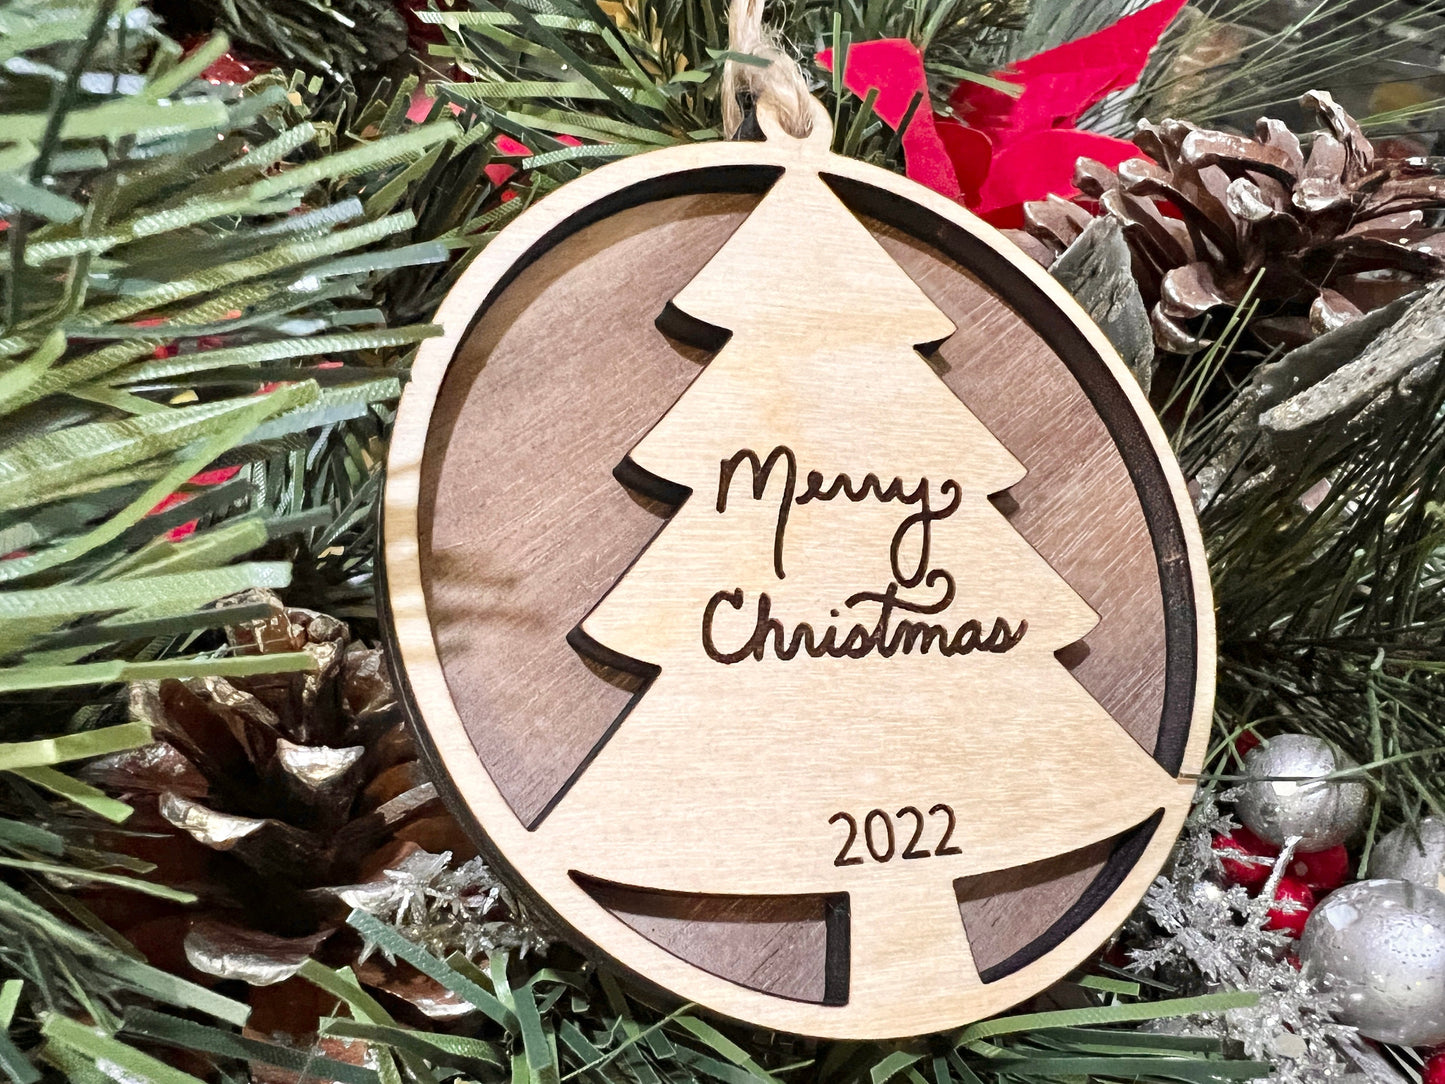 3D Merry Christmas ornament, wooden 2023 christmas ornament, custom wood established date gift, yearly Christmas keepsake, holiday decor